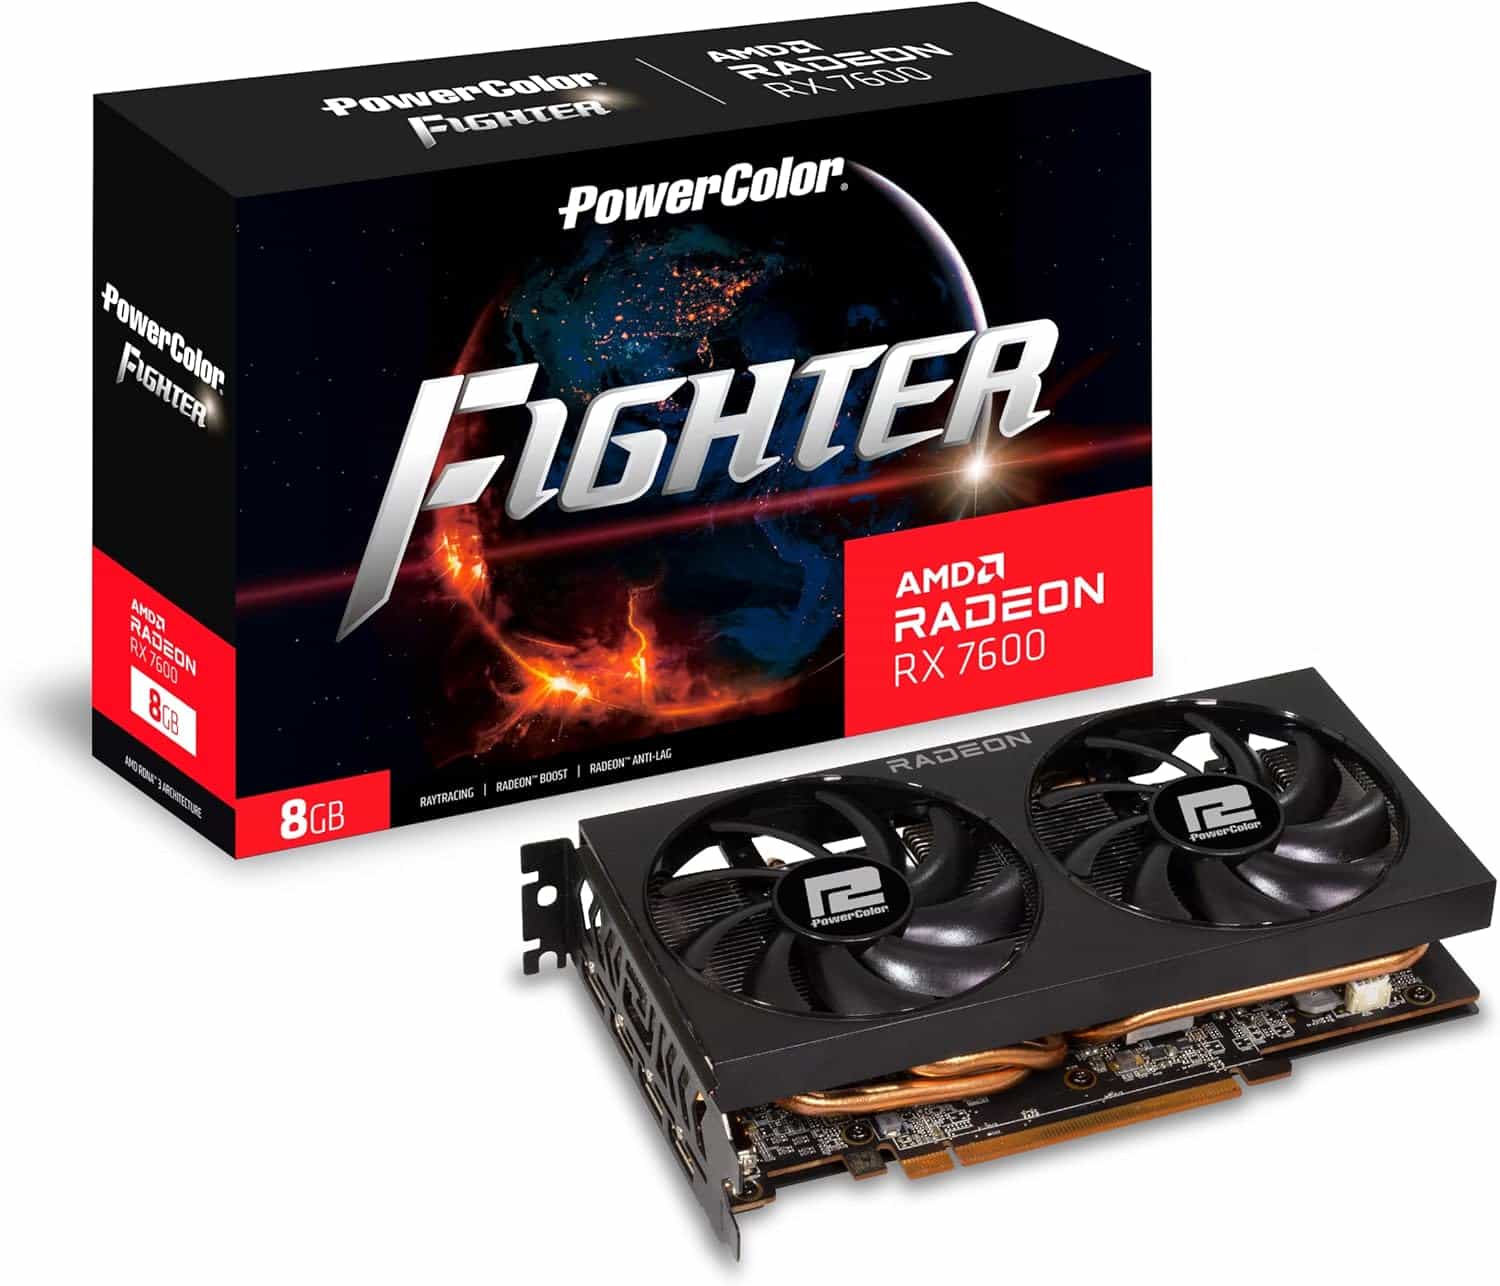 PowerColor Fighter GPU with AMD Radeon RX 7600 model displayed next to its box featuring cosmic-themed graphics.